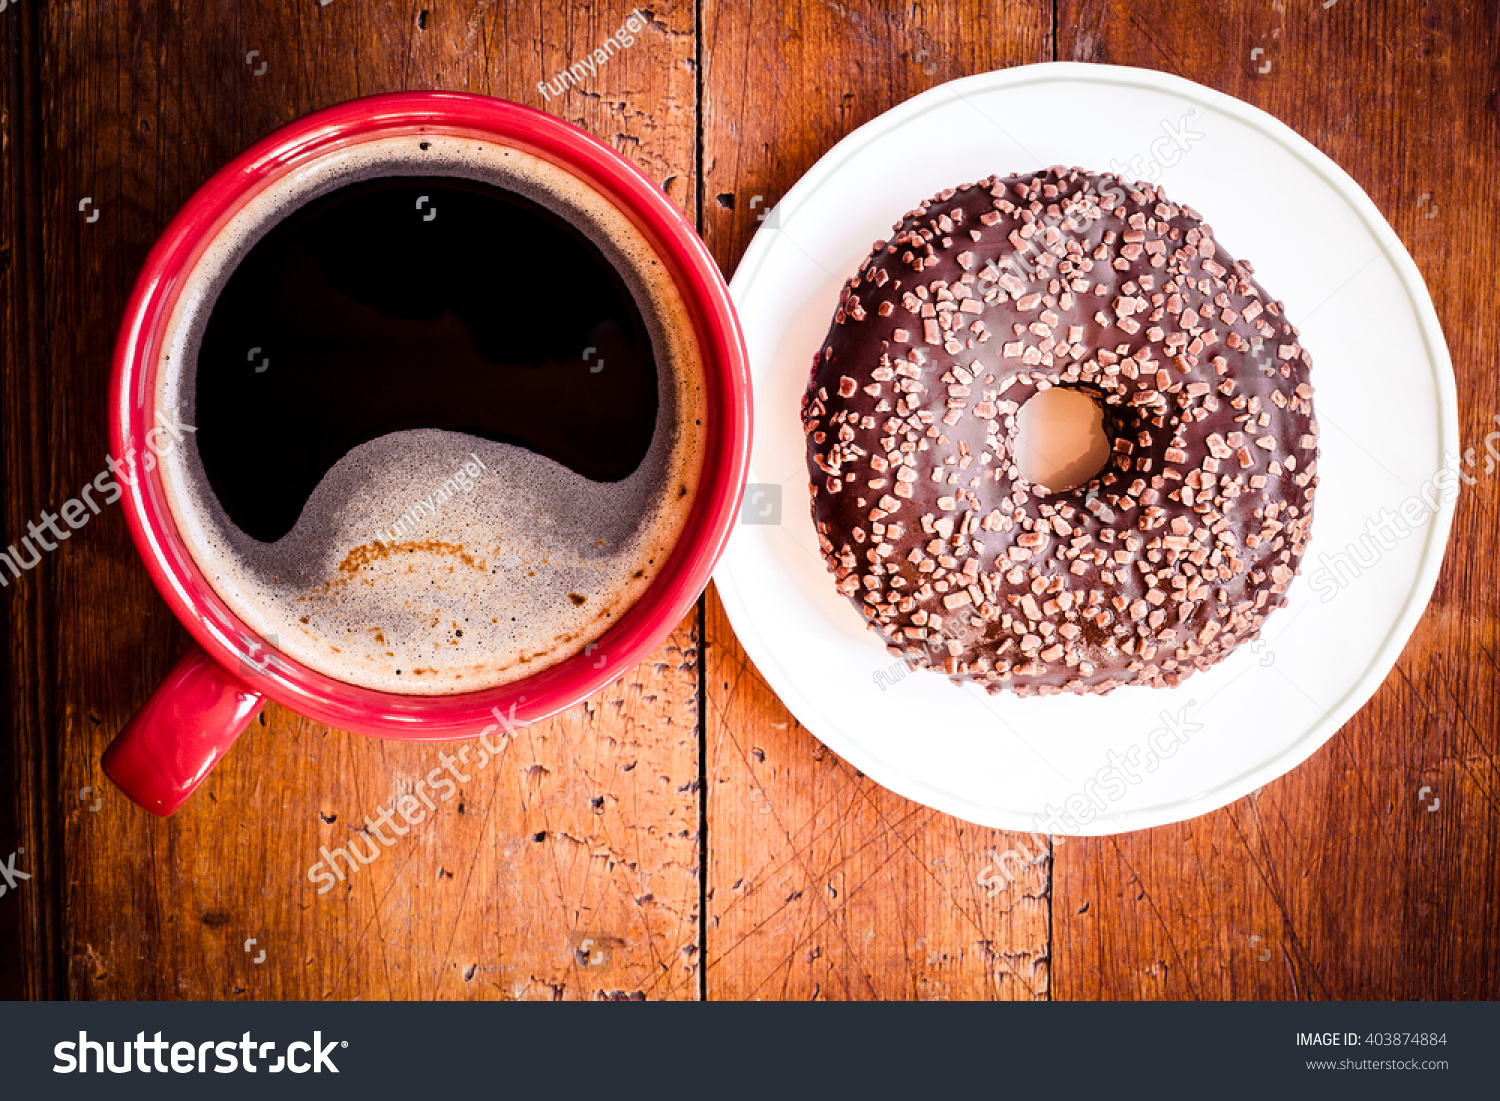 Doughnut. Sweet food and red cup of coffee, tea drink. Breakfast, dessert with cake, snack. Brown wooden table. Bakery, sugar doughnut. Tasty espresso black hot morning beverage. 